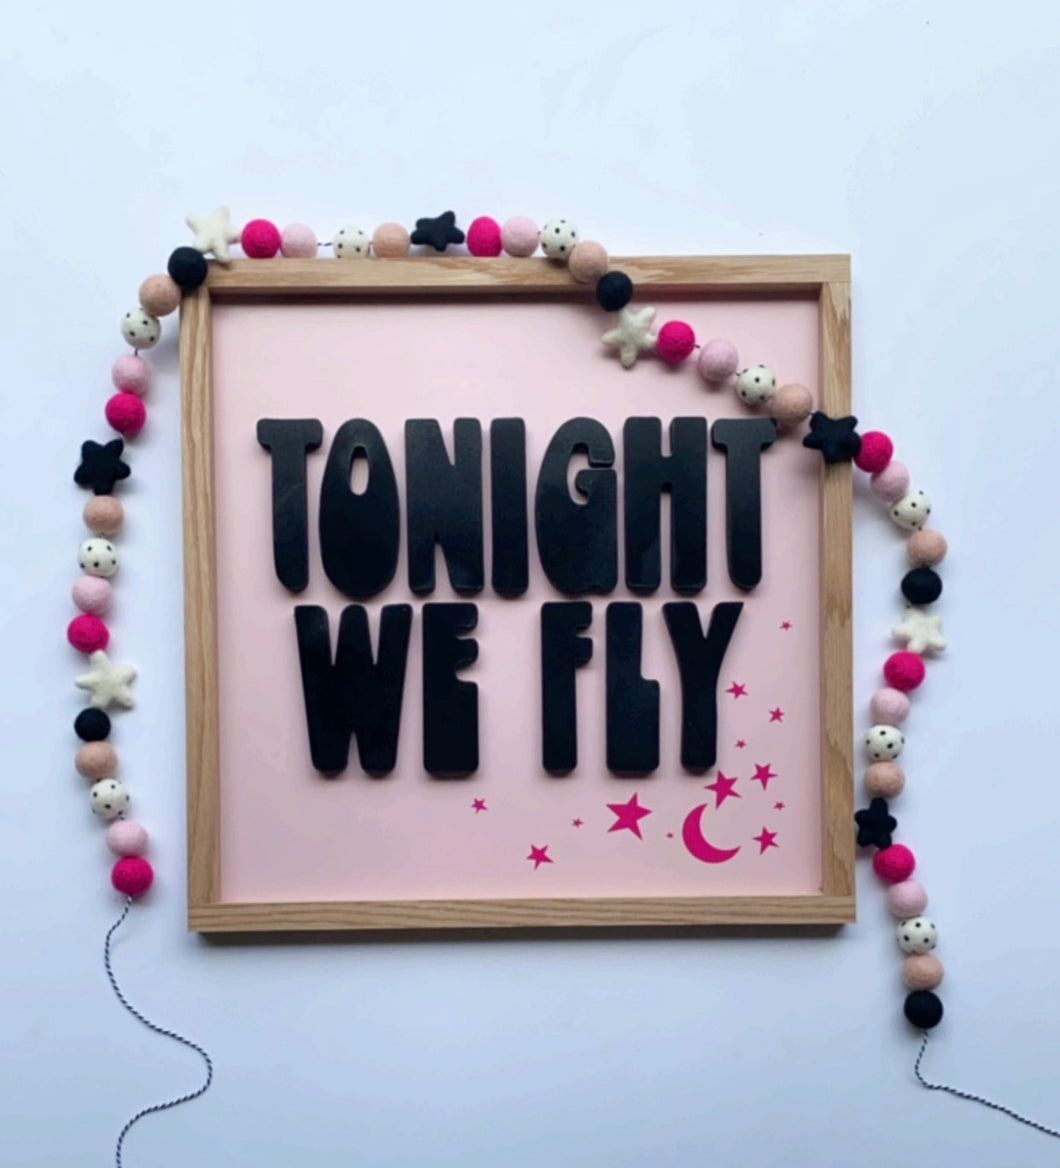 Tonight we fly-black letters- Collab with ThreadMamaStory